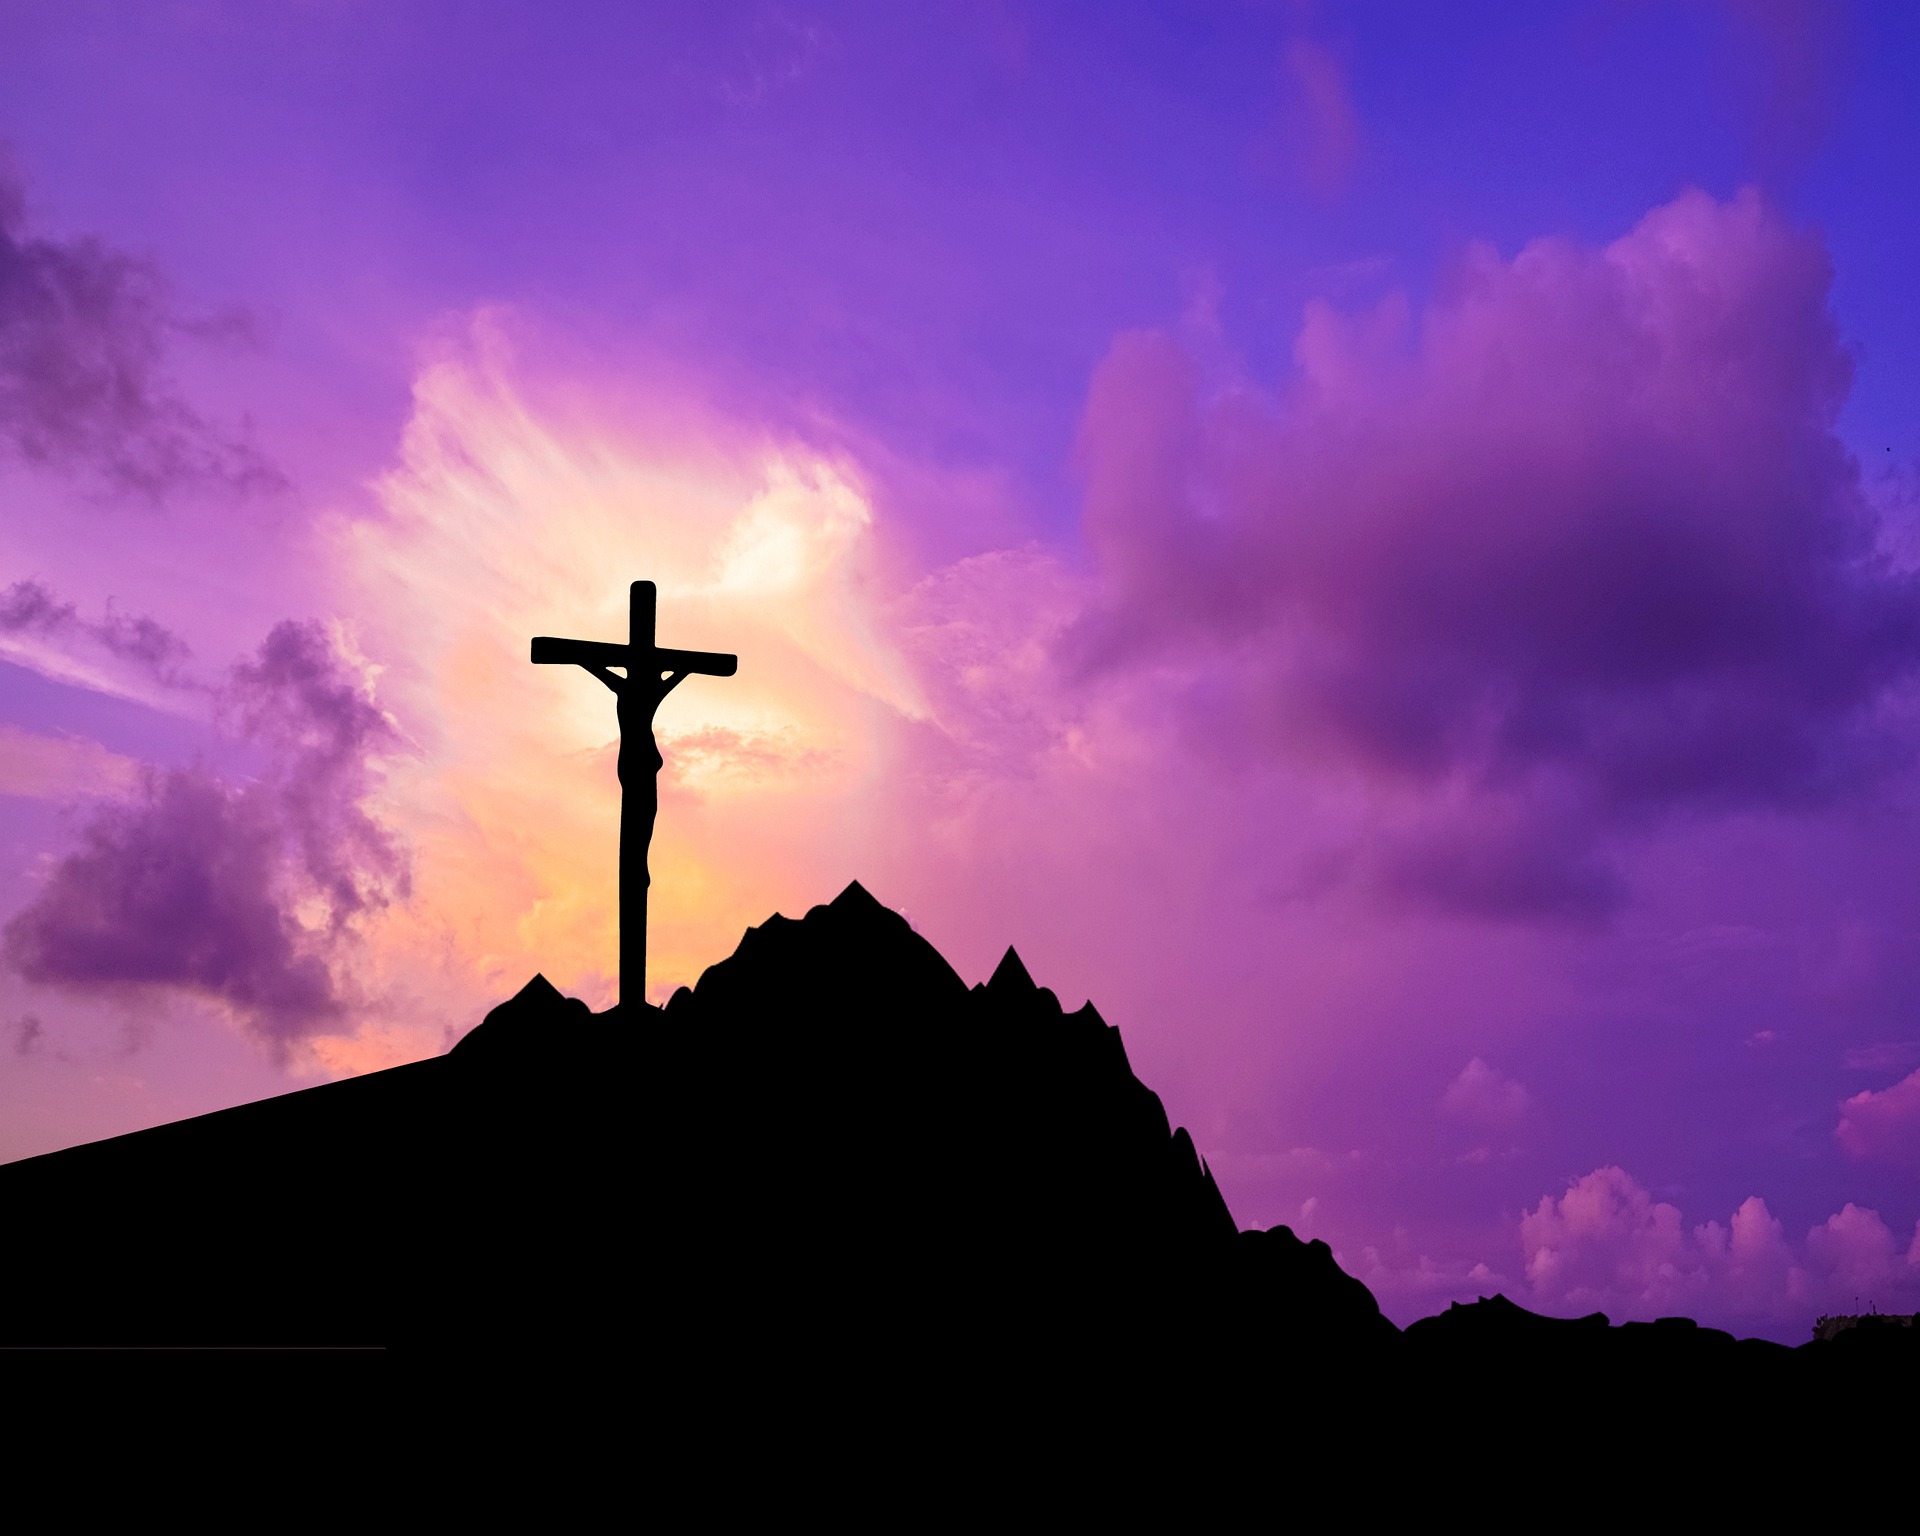 The crucifixtion of Christ was a blood sacrifice for our sins: Image by Briam Cute from Pixabay